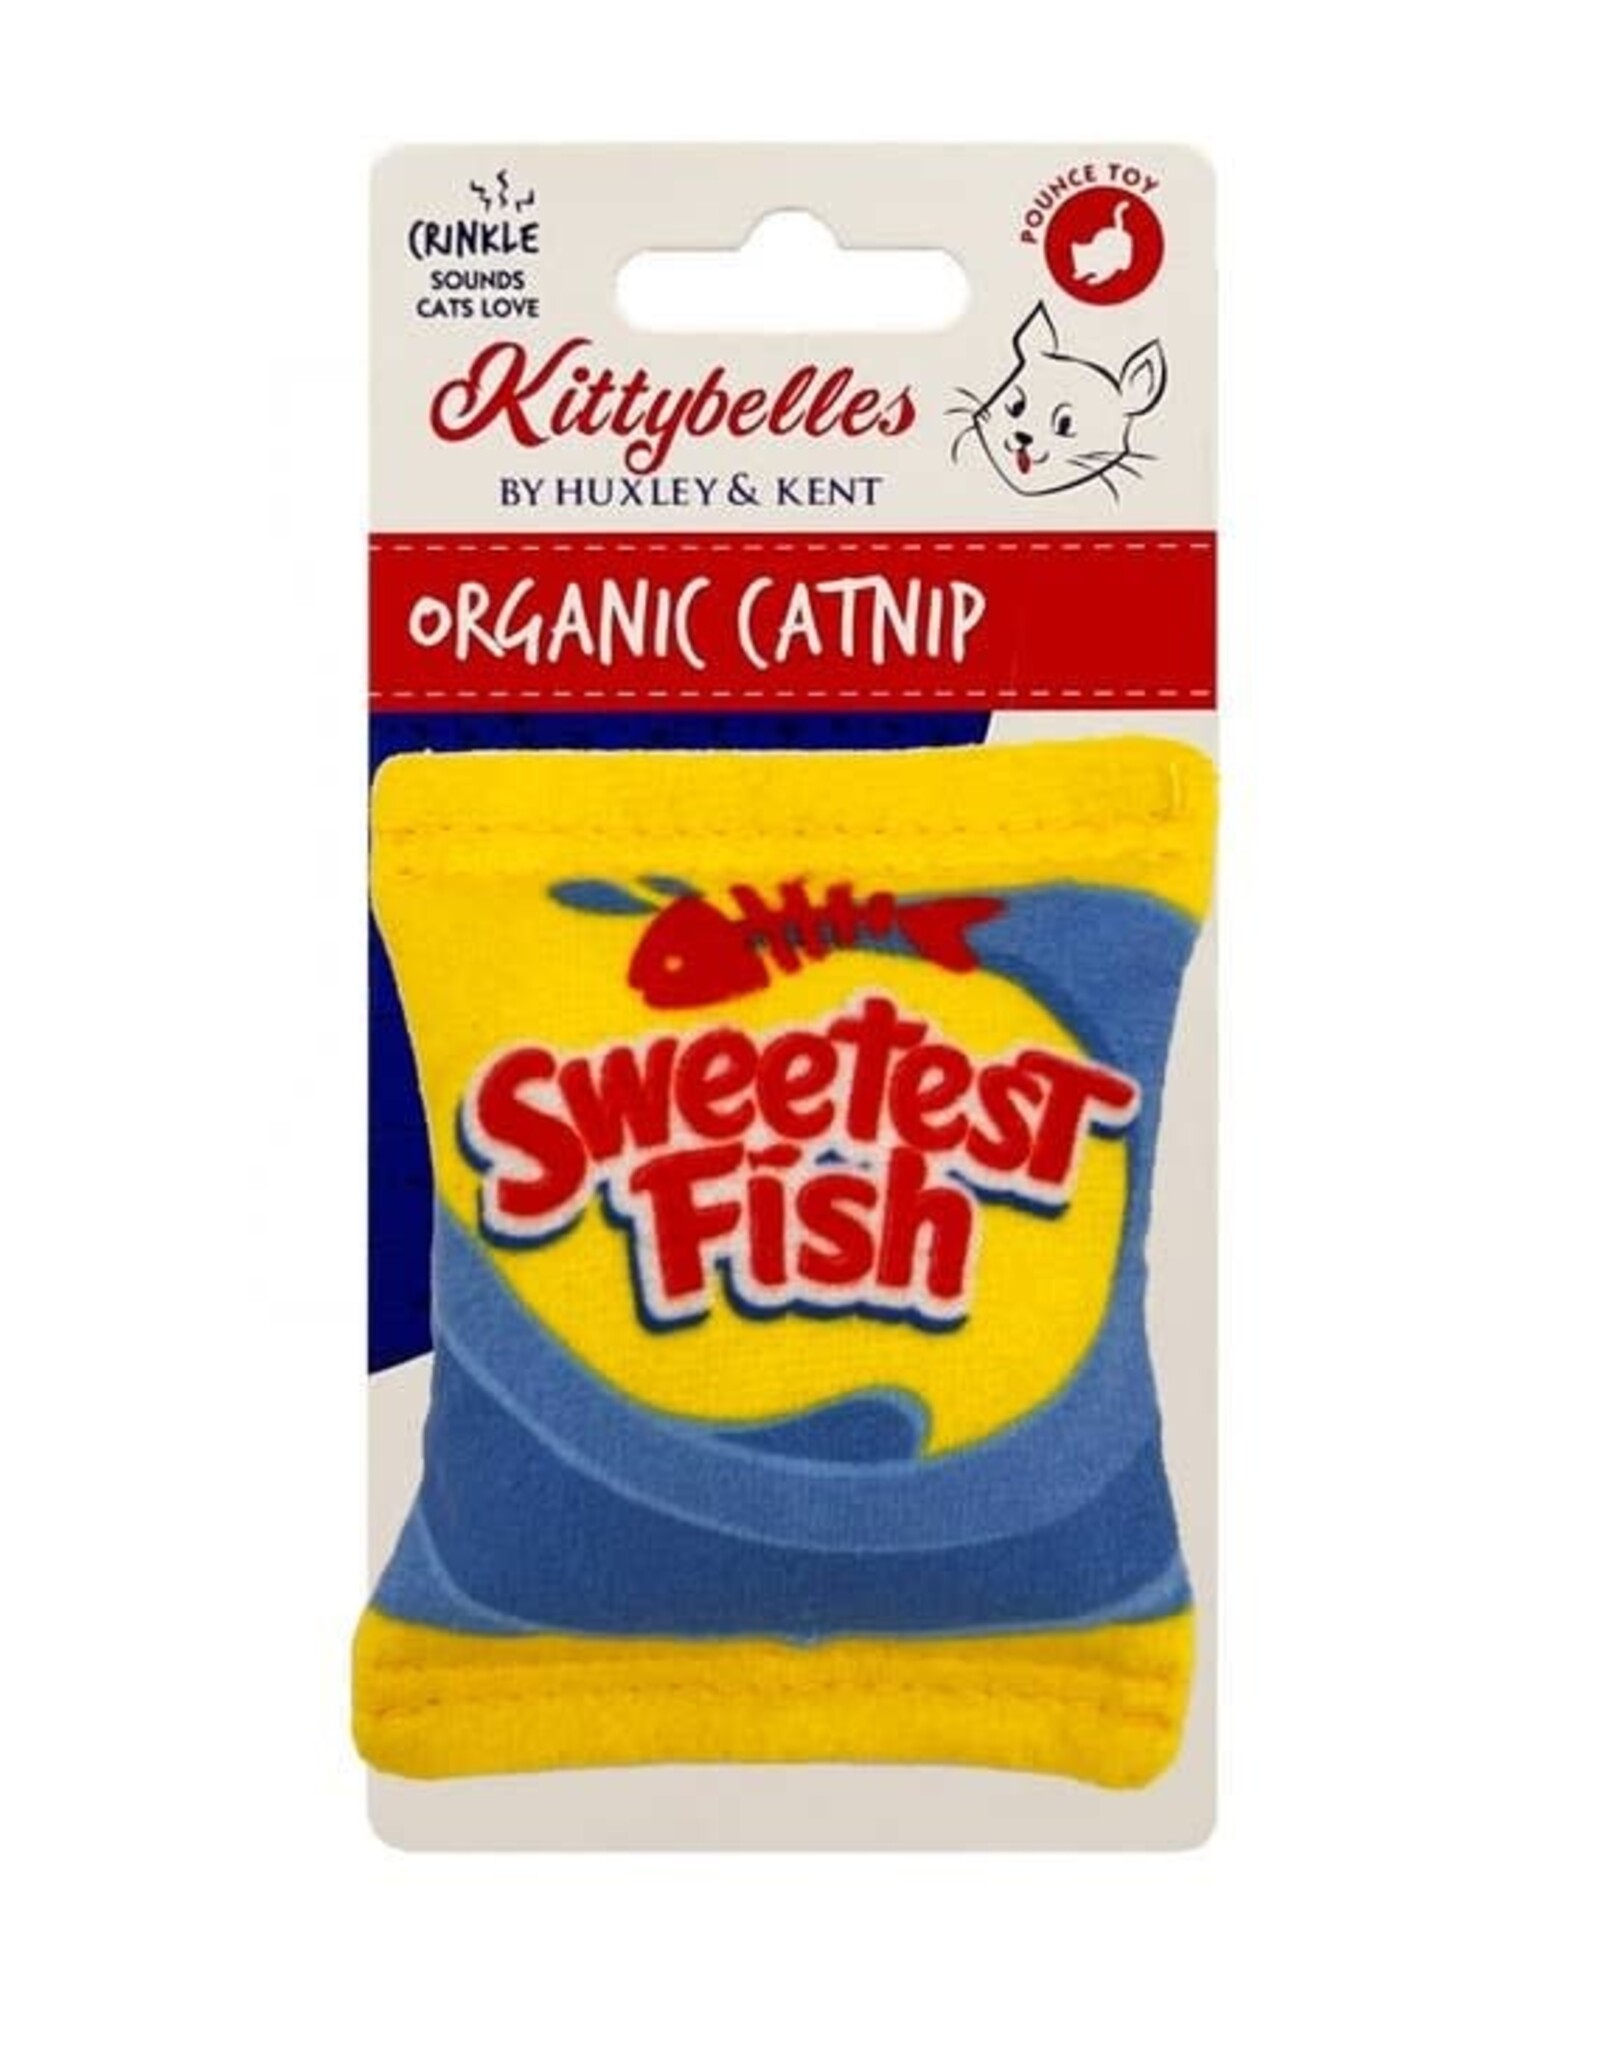 Huxley & Kent Kittybelles Sweetest Fish For Cats